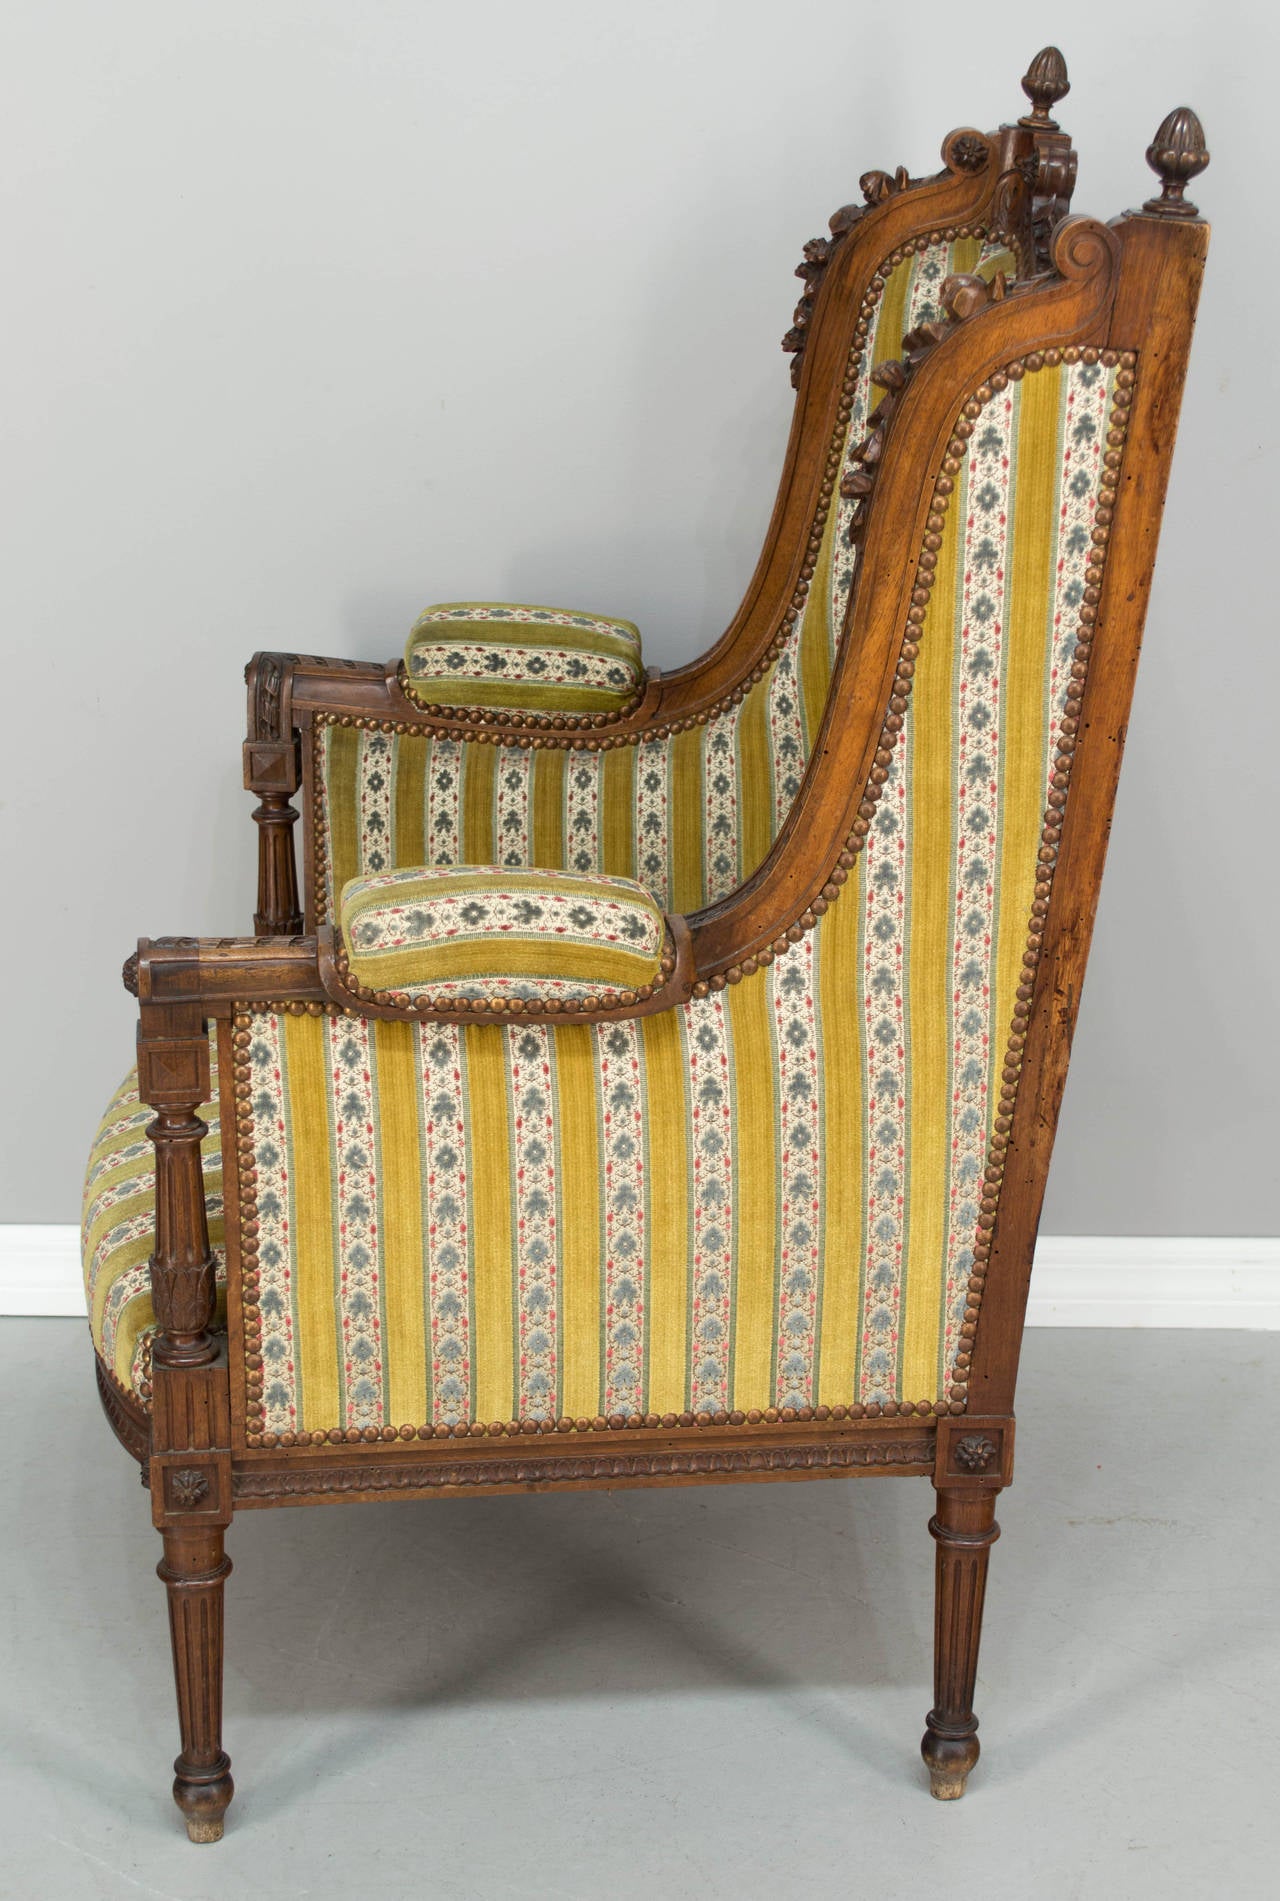 19th c. French Louis XVI style bergere or wingback armchair, c.1860-1880 Very sturdy and comfortable with great carved details: garlands of roses at the top, scrolls with rosettes and acorn finials. Original upholstery. As always, more photos